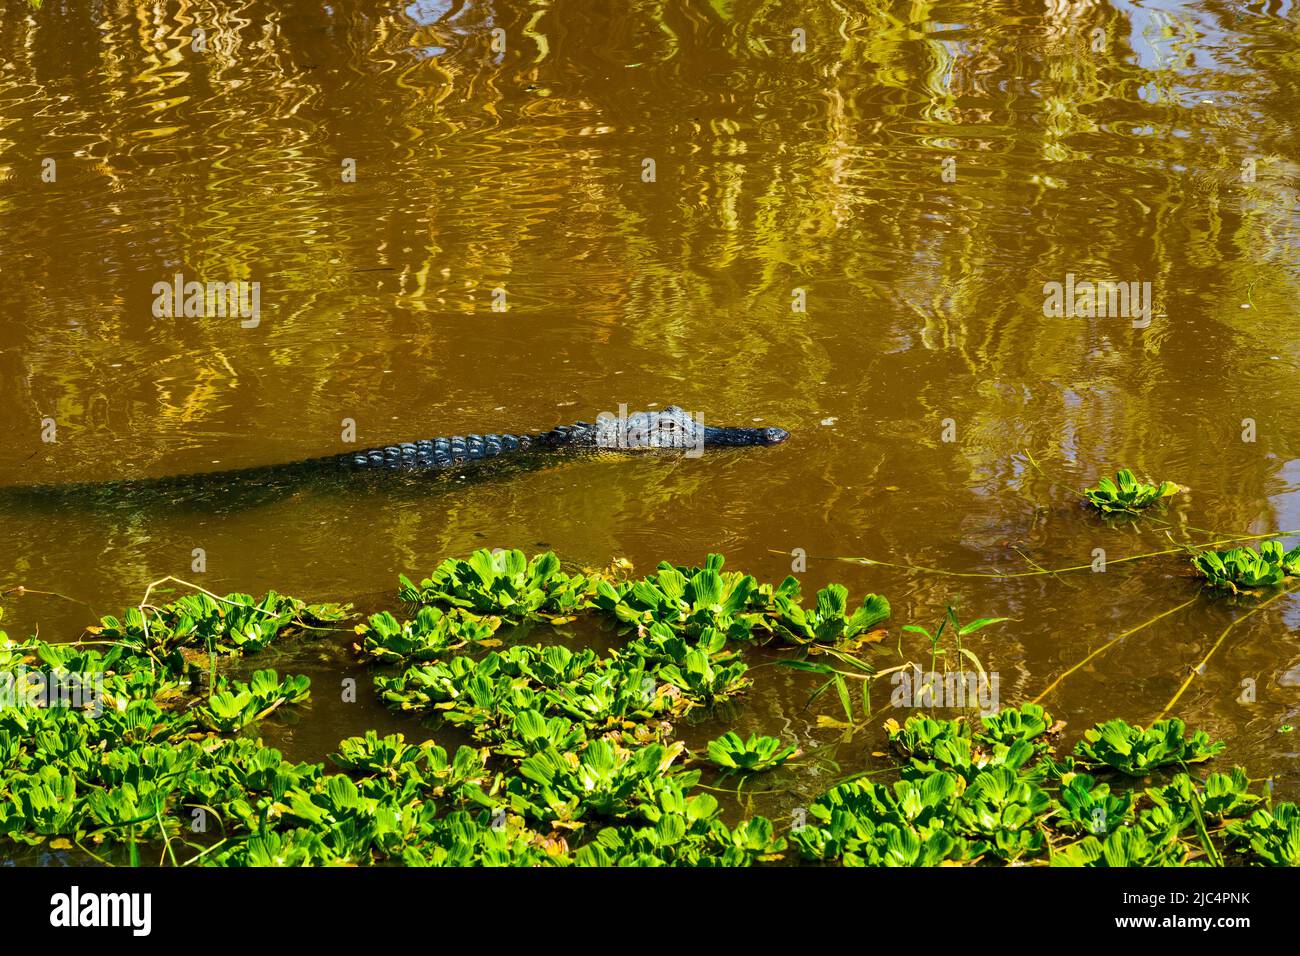 Floating Water Hyacinth plants next to the alligator swimming in the muddy waters in the Florida Everglades. Stock Photo